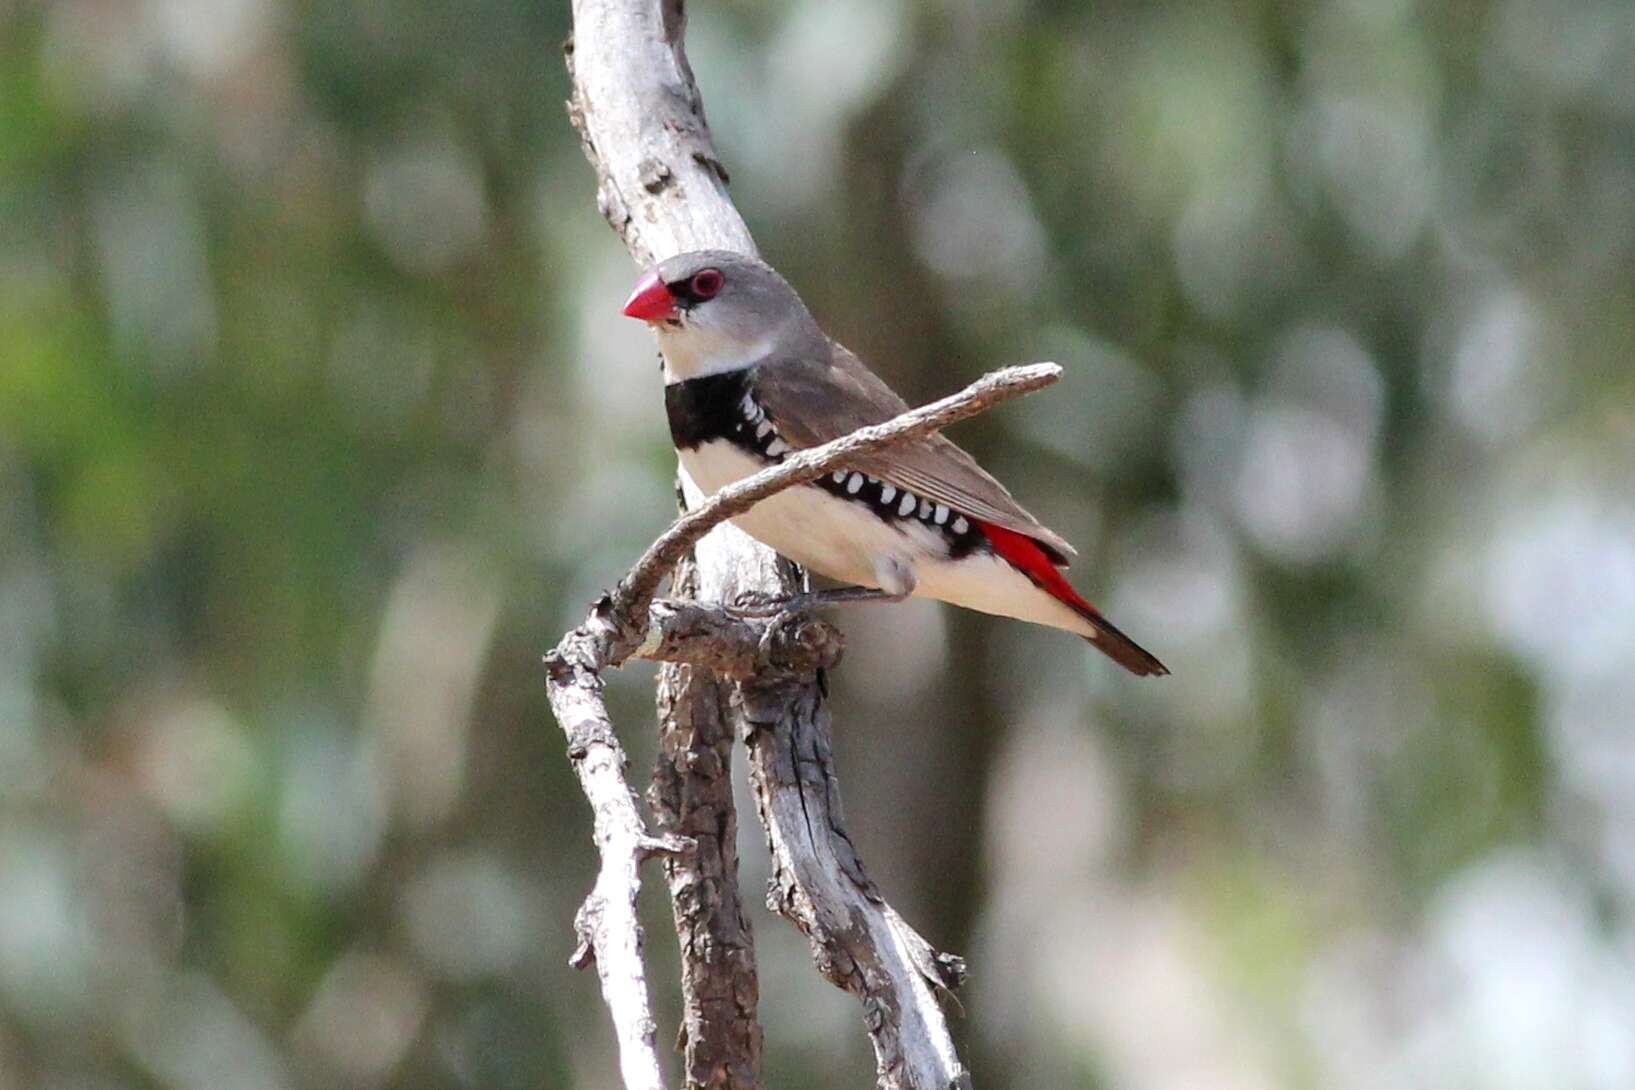 Image of firetail finches